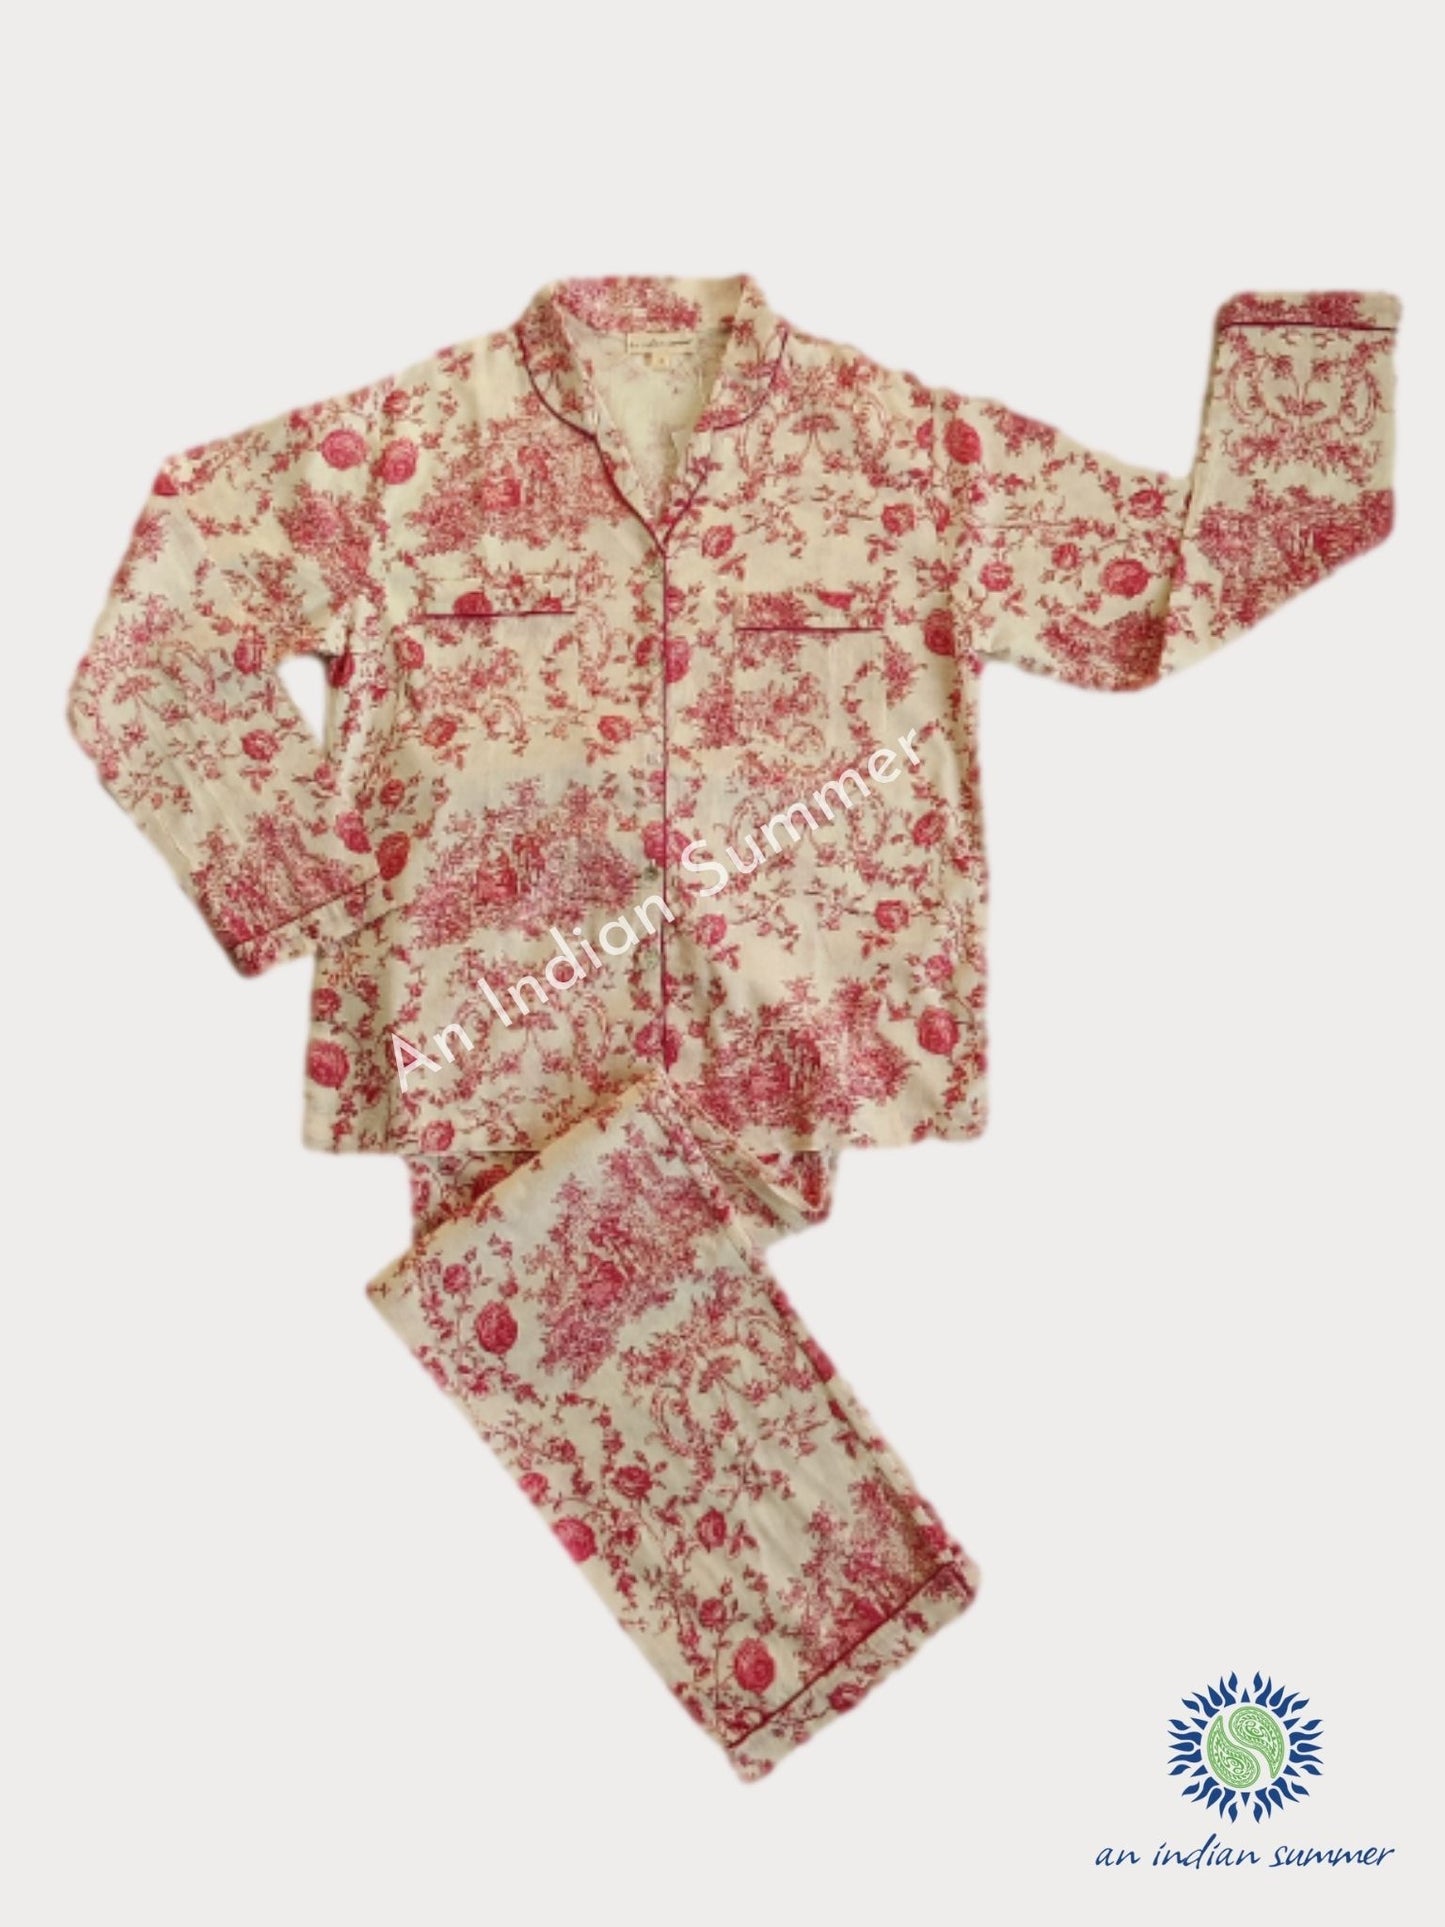 Toile De Jouy | Long Pyjama Set | Berry Red | Premium Quality Poplin Cotton | An Indian Summer | Seasonless Timeless Sustainable Ethical Authentic Artisan Conscious Clothing Lifestyle Brand